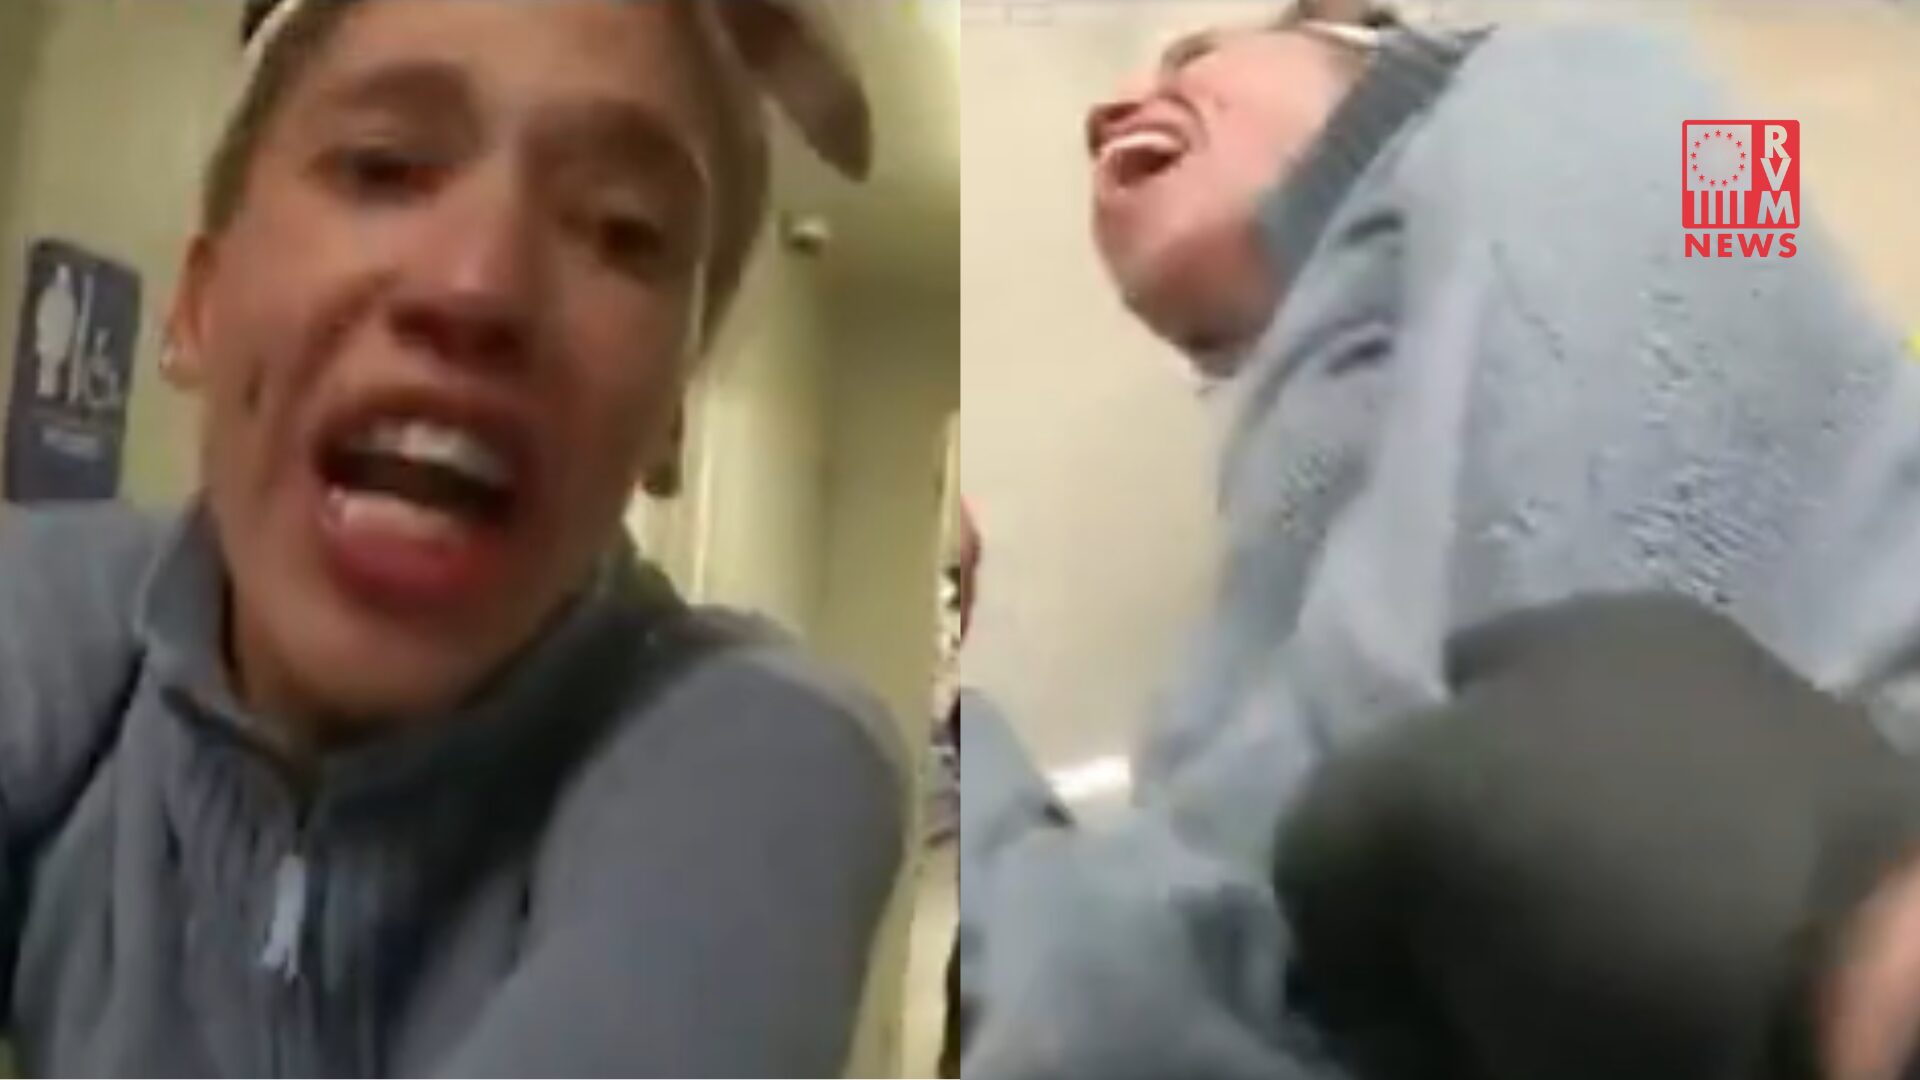 Karen Has A TOTAL MELTDOWN While Being Arrested For Shoplifting [VIDEO]